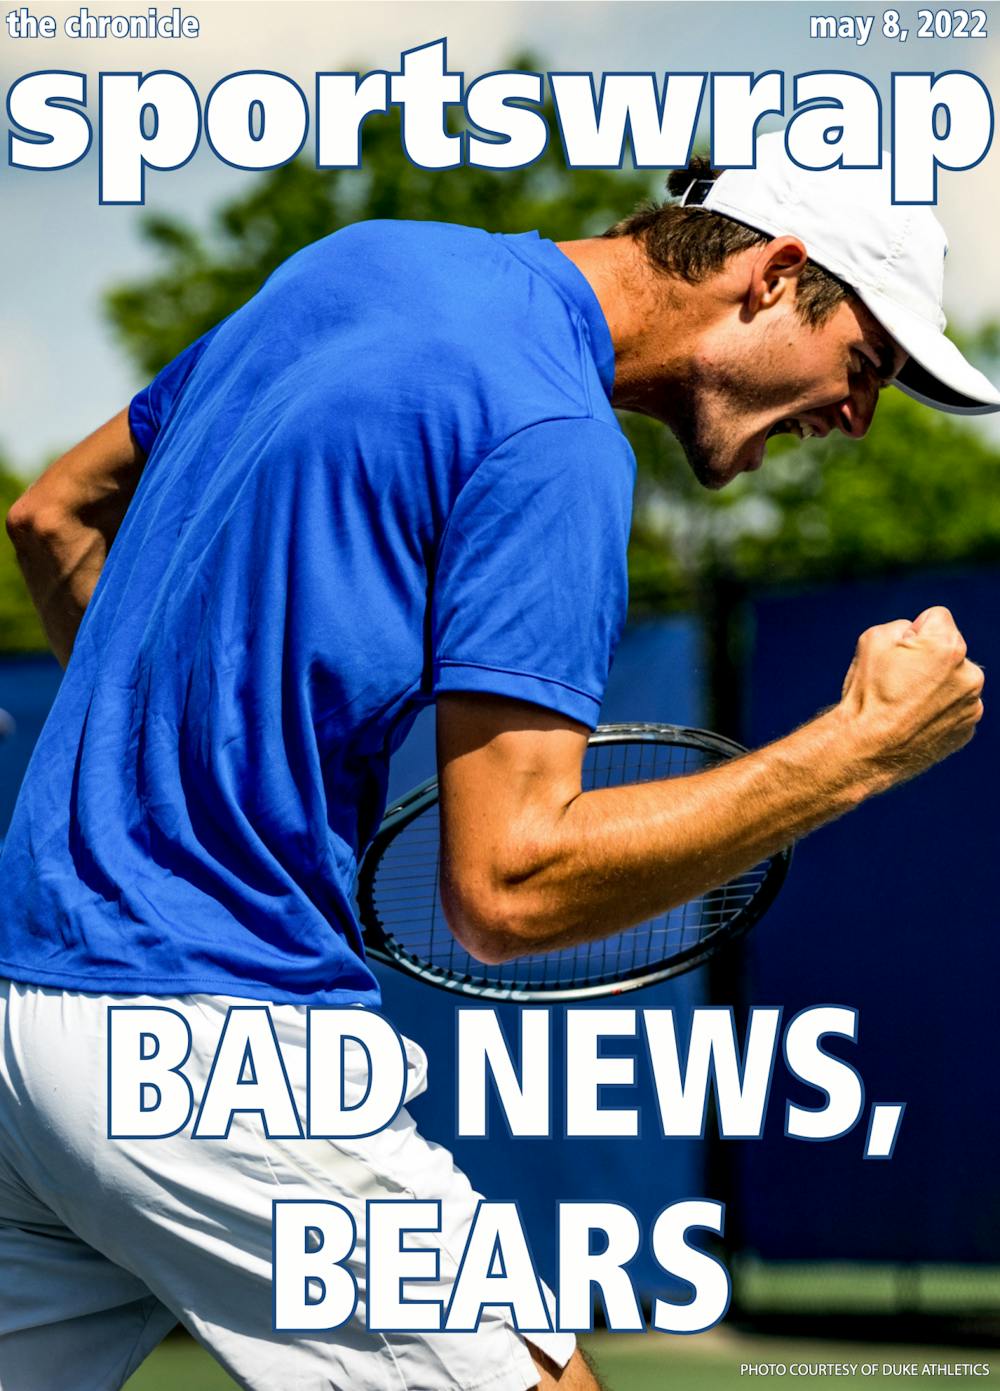 Duke men's tennis made short work of its opening two opponents in the NCAA tournament, securing a place in the last 16.